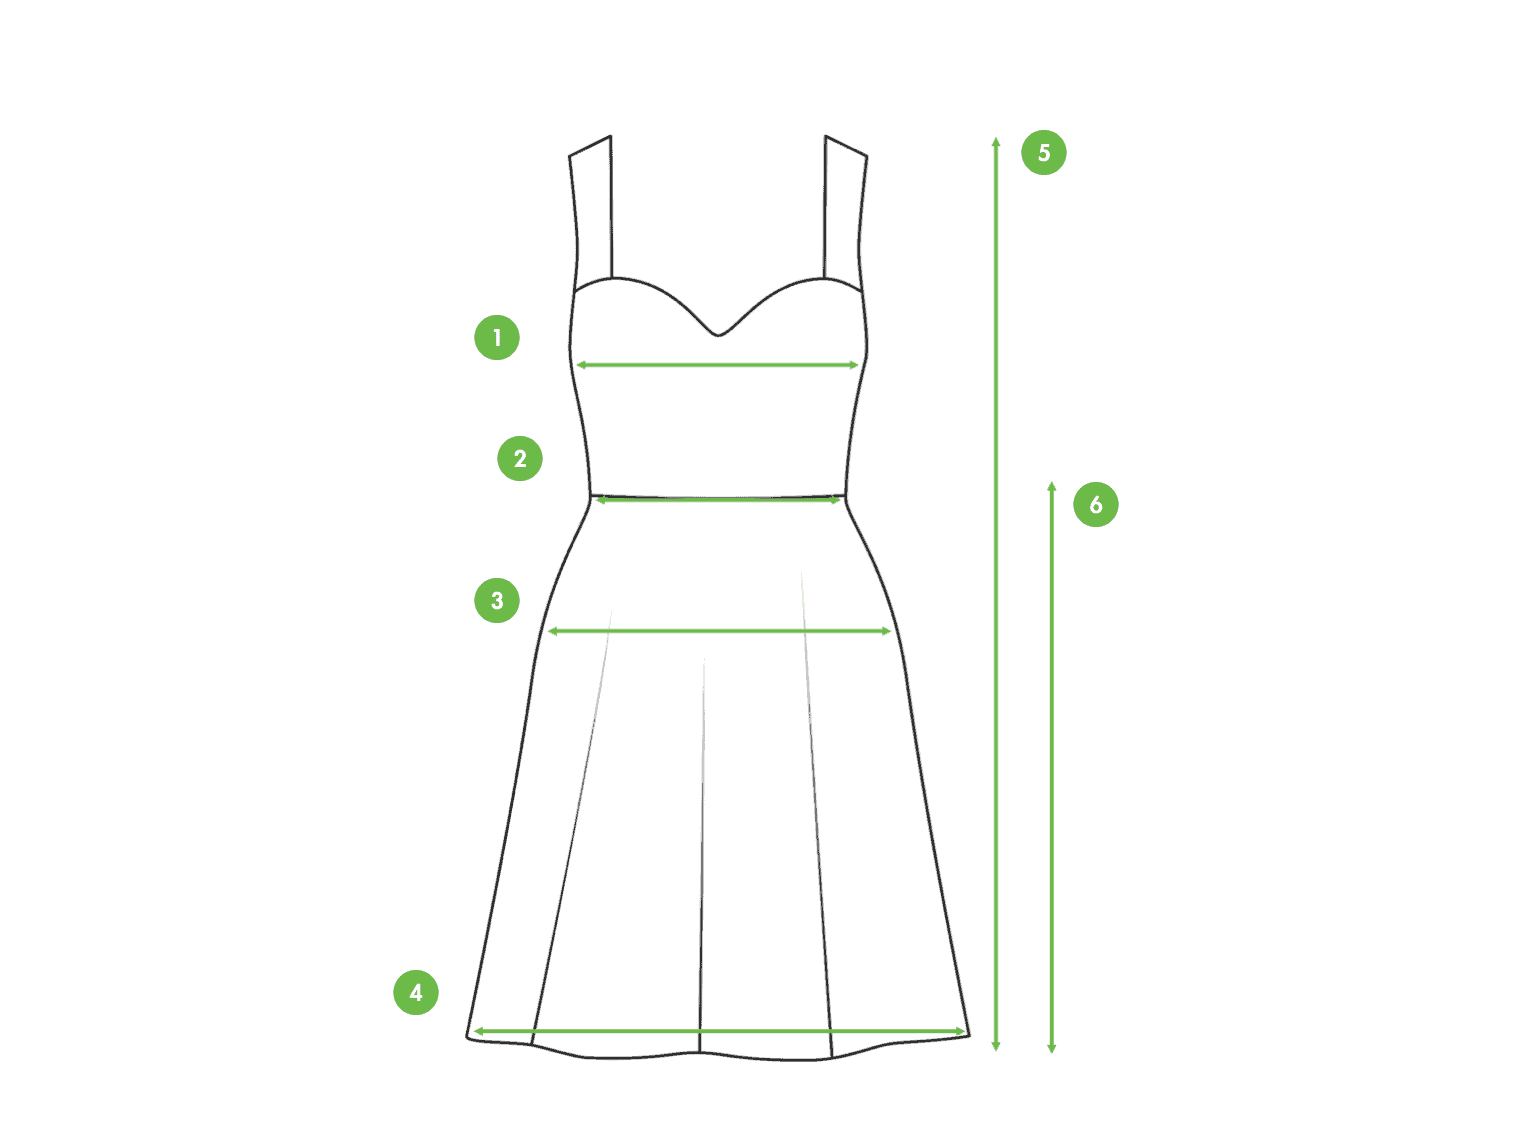 How to Measure a Dress? Kiwi Sizing - Improve conversion and lower returns.